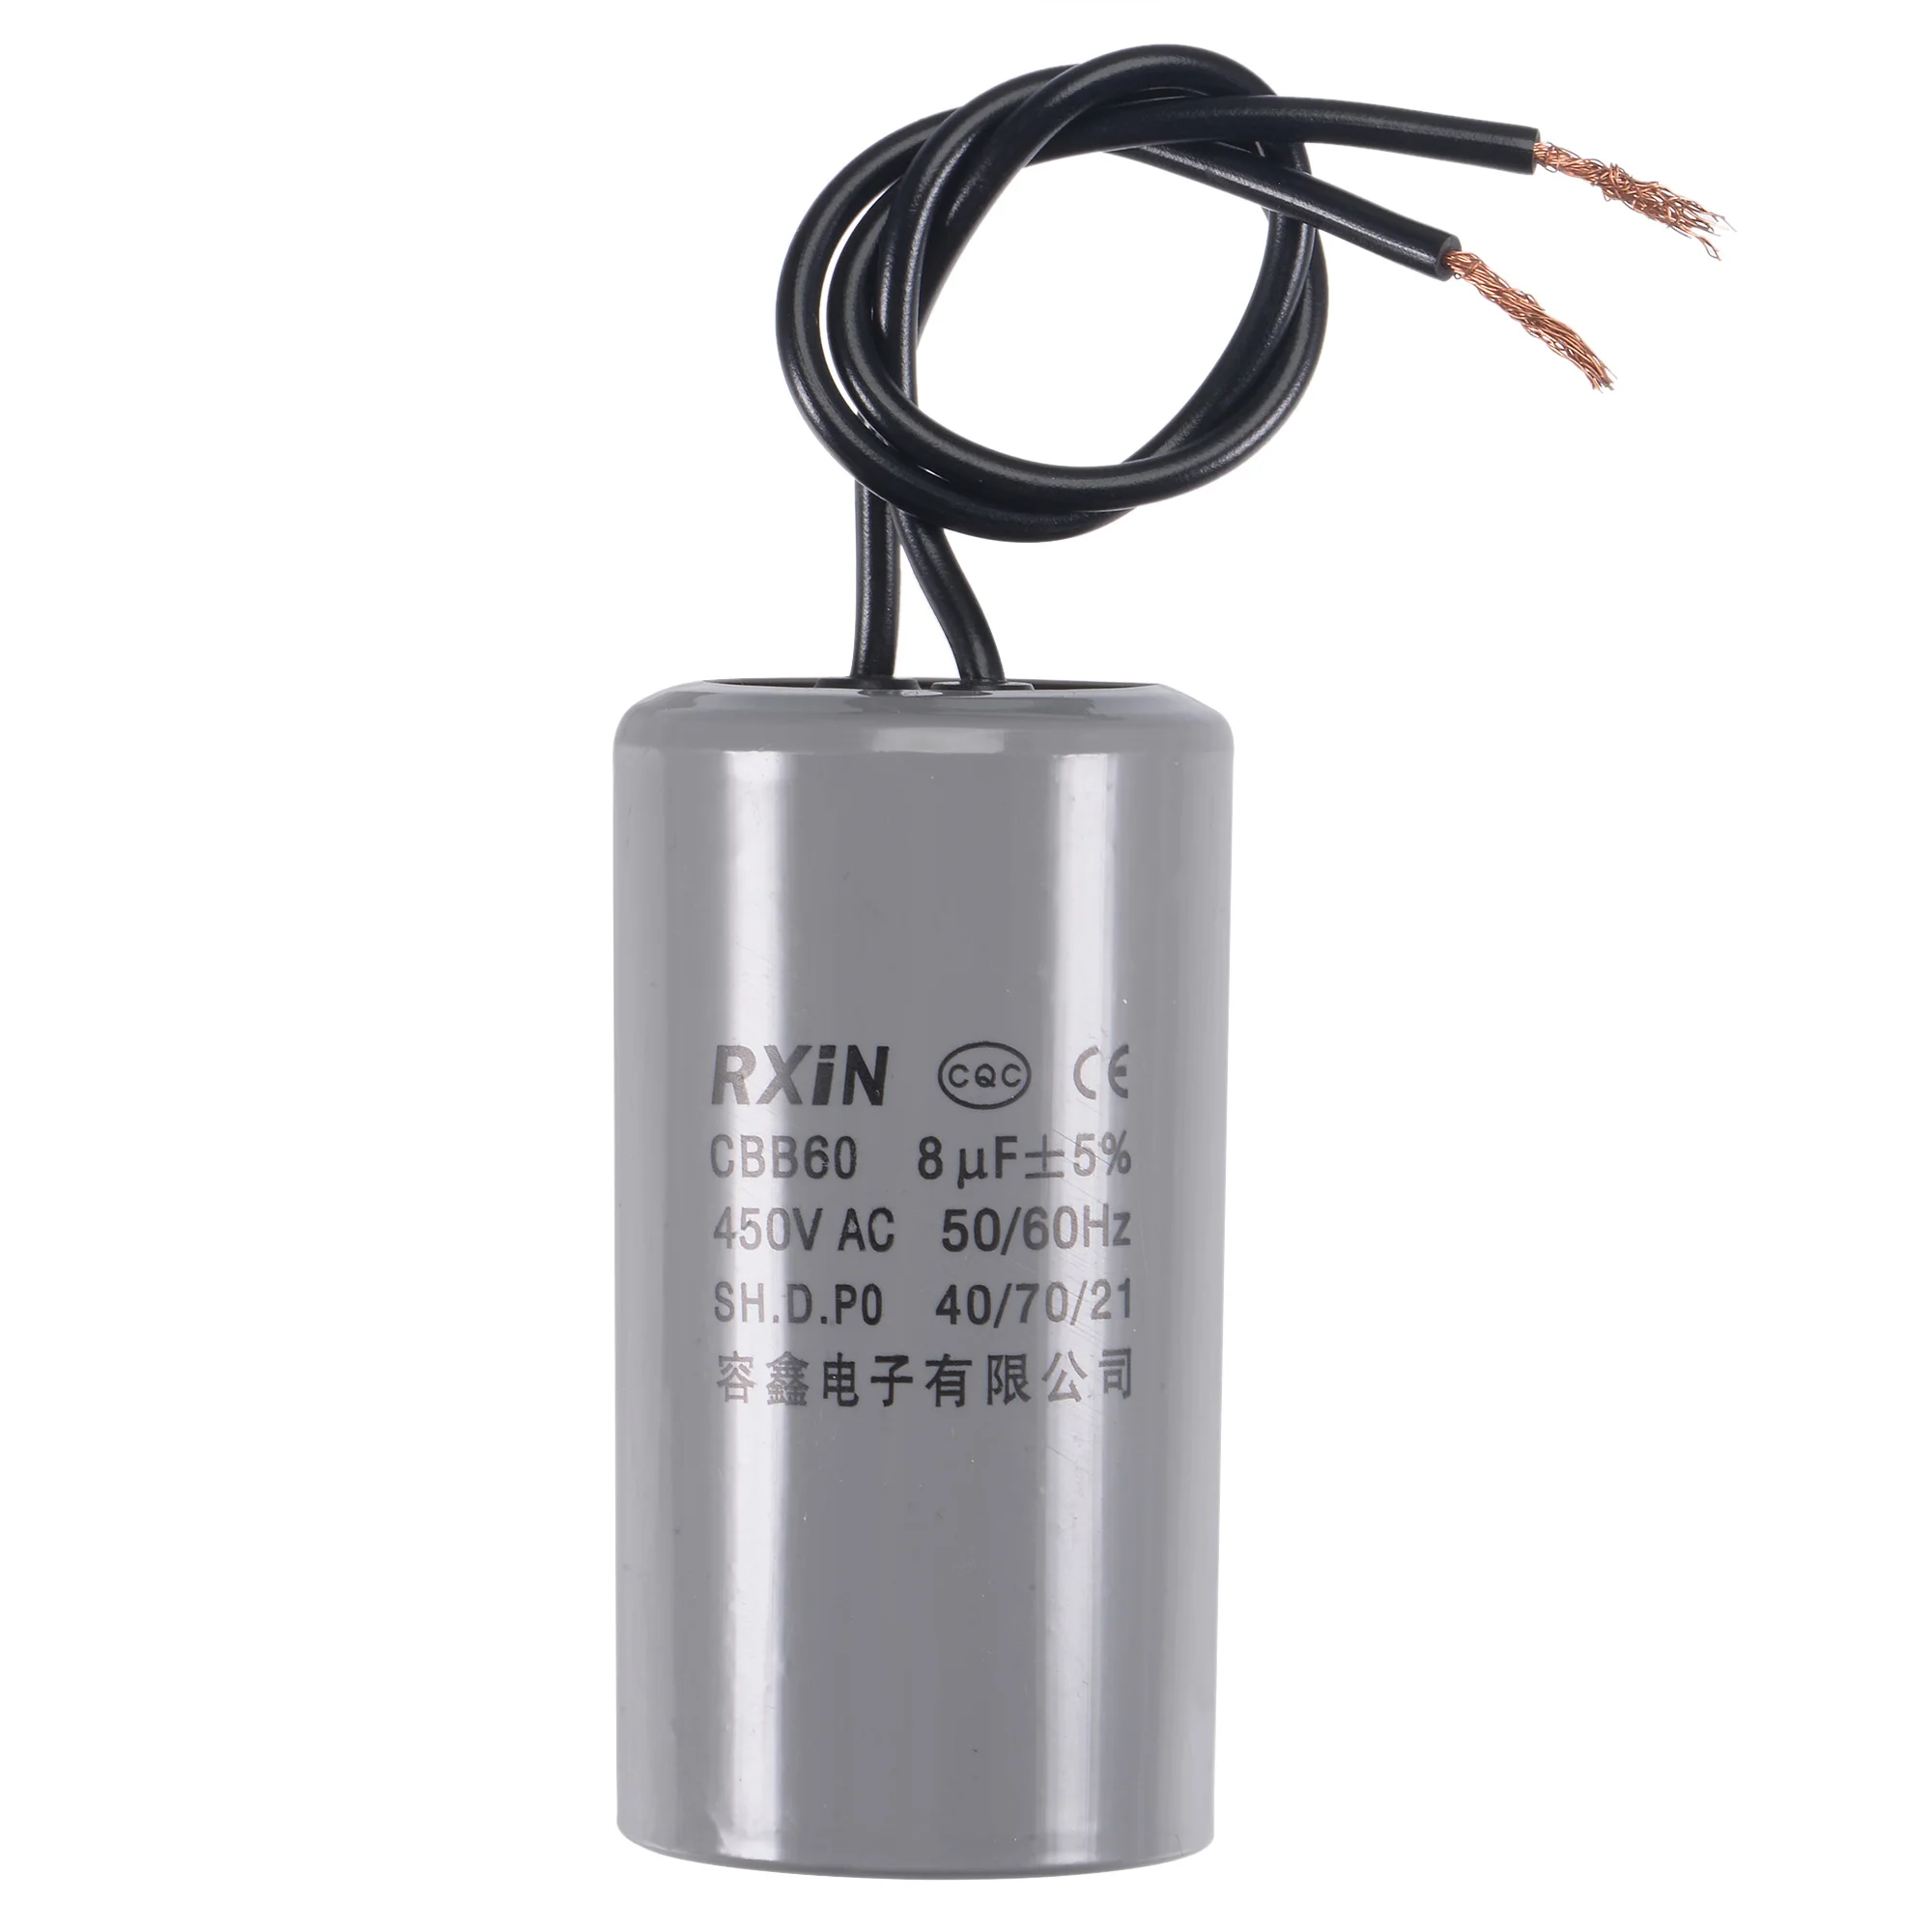 

Uxcell CBB60 Run Capacitor 8uF 450V AC 2 Wires 66x35mm for Compressor Pump Motor